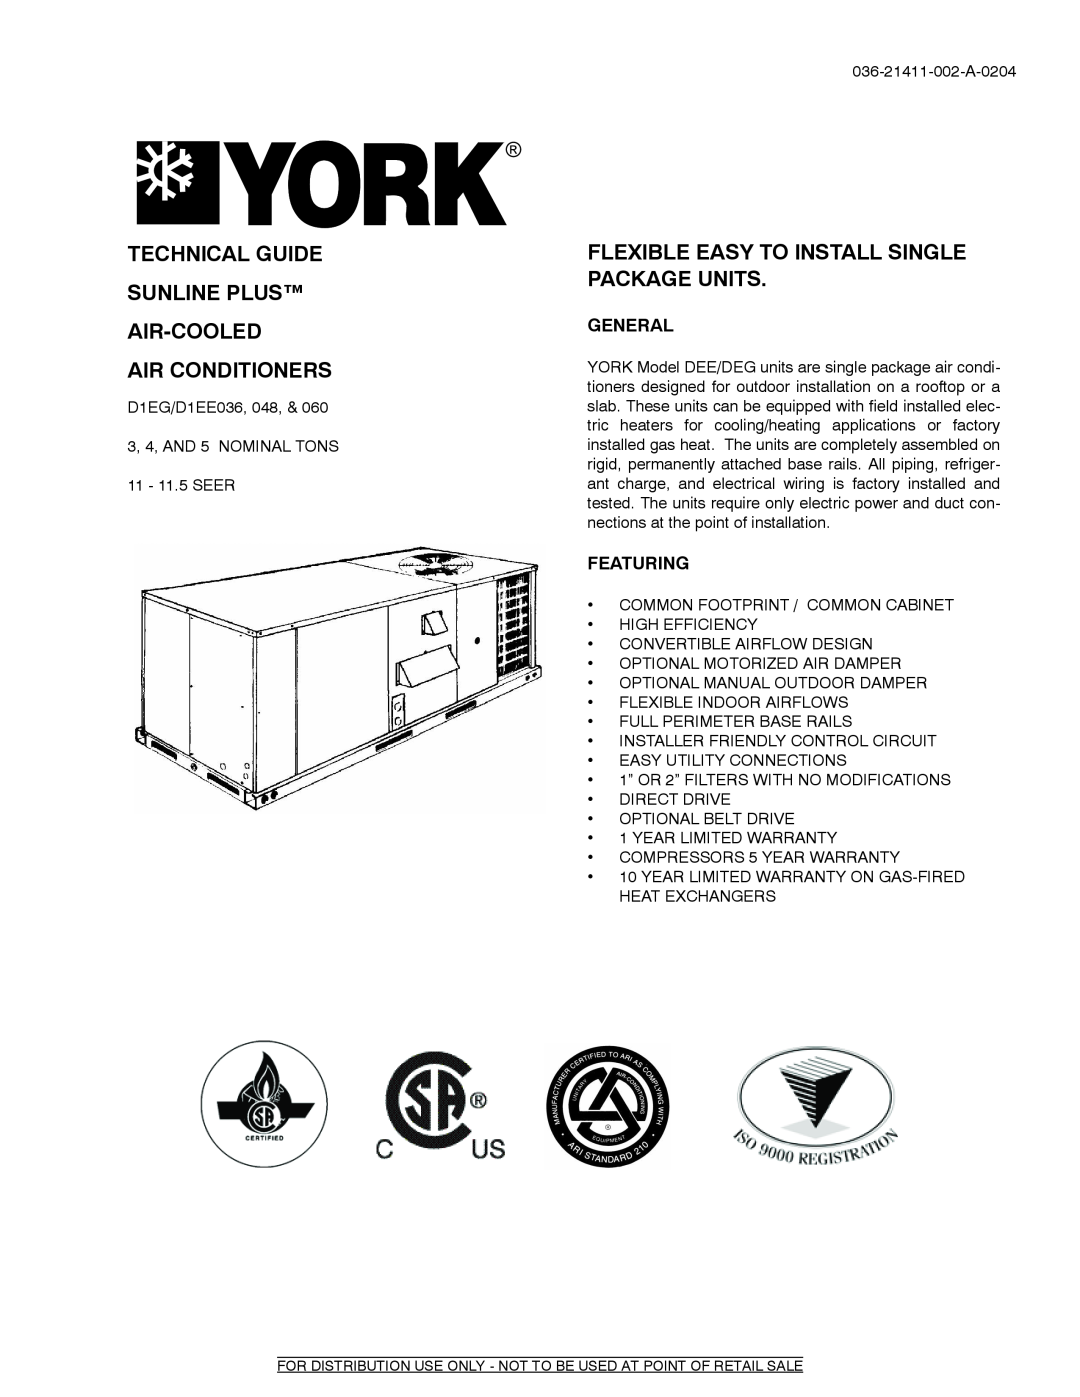 York D1EG, D1EE036 warranty Technical Guide Sunline Plus Air-Cooled, Air Conditioners, General, Featuring 